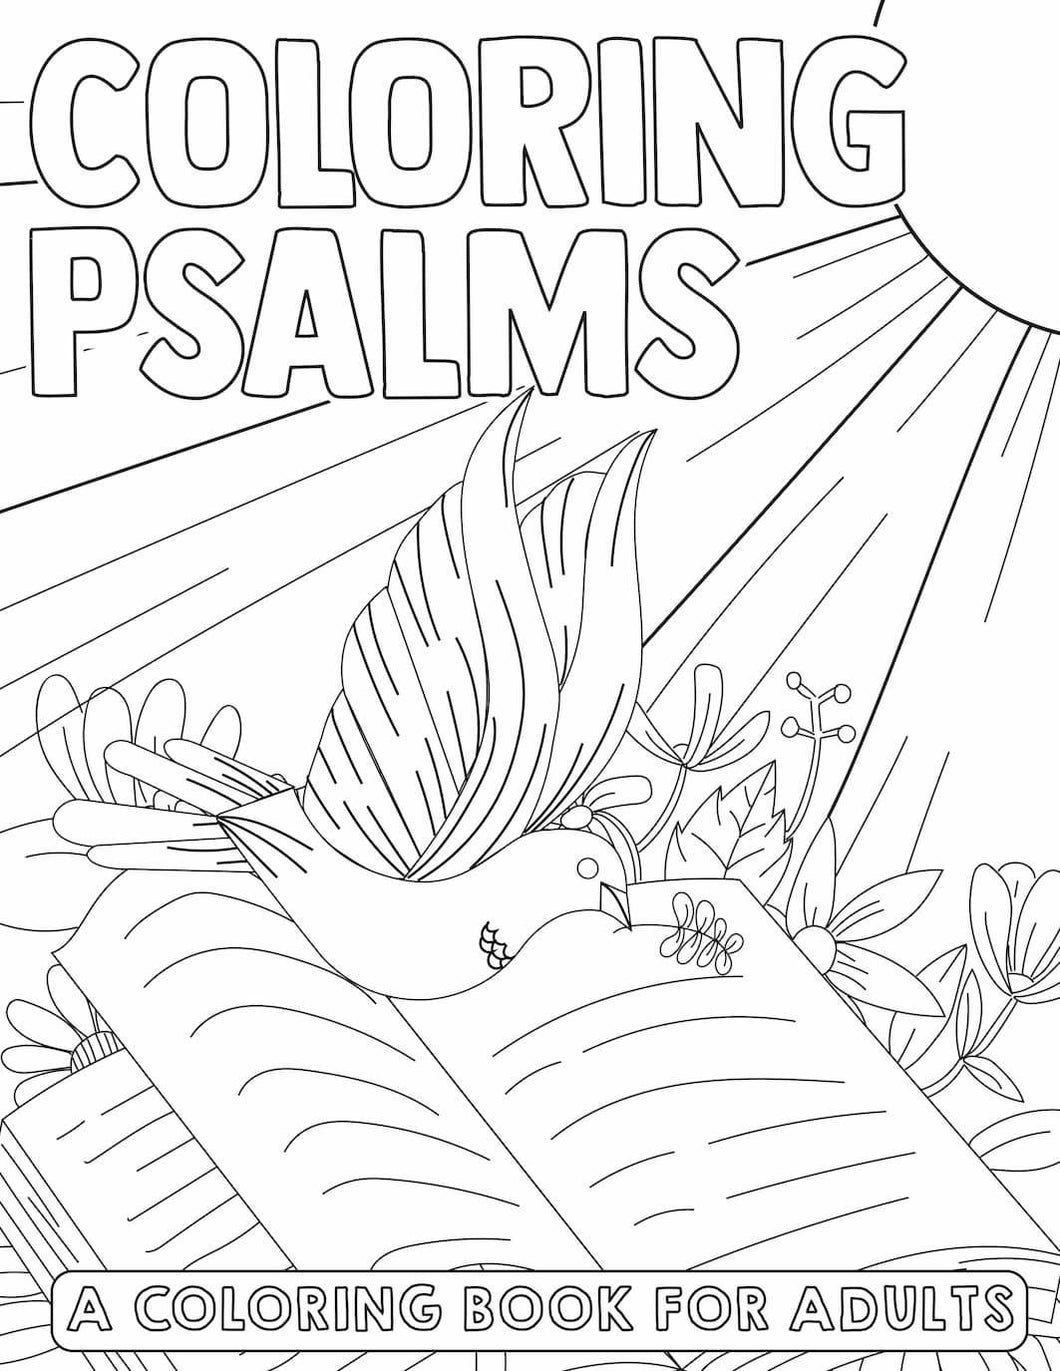 book-of-psalms-37-page-bible-coloring-book-download-only-the